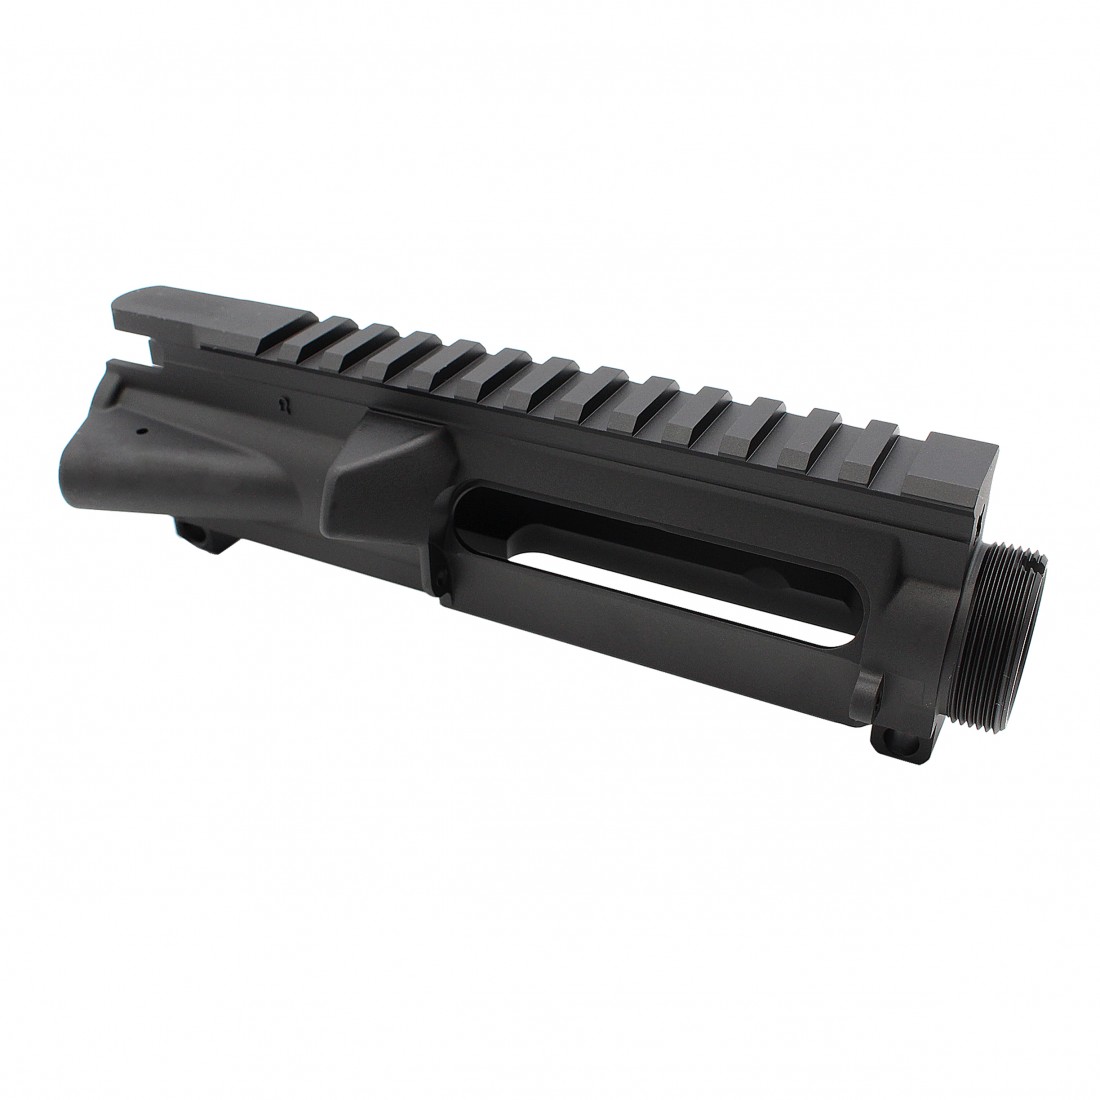 PUNISHER AR-15 Upper Receiver, Charging Handle LATCH 05, Dust Cover and For...